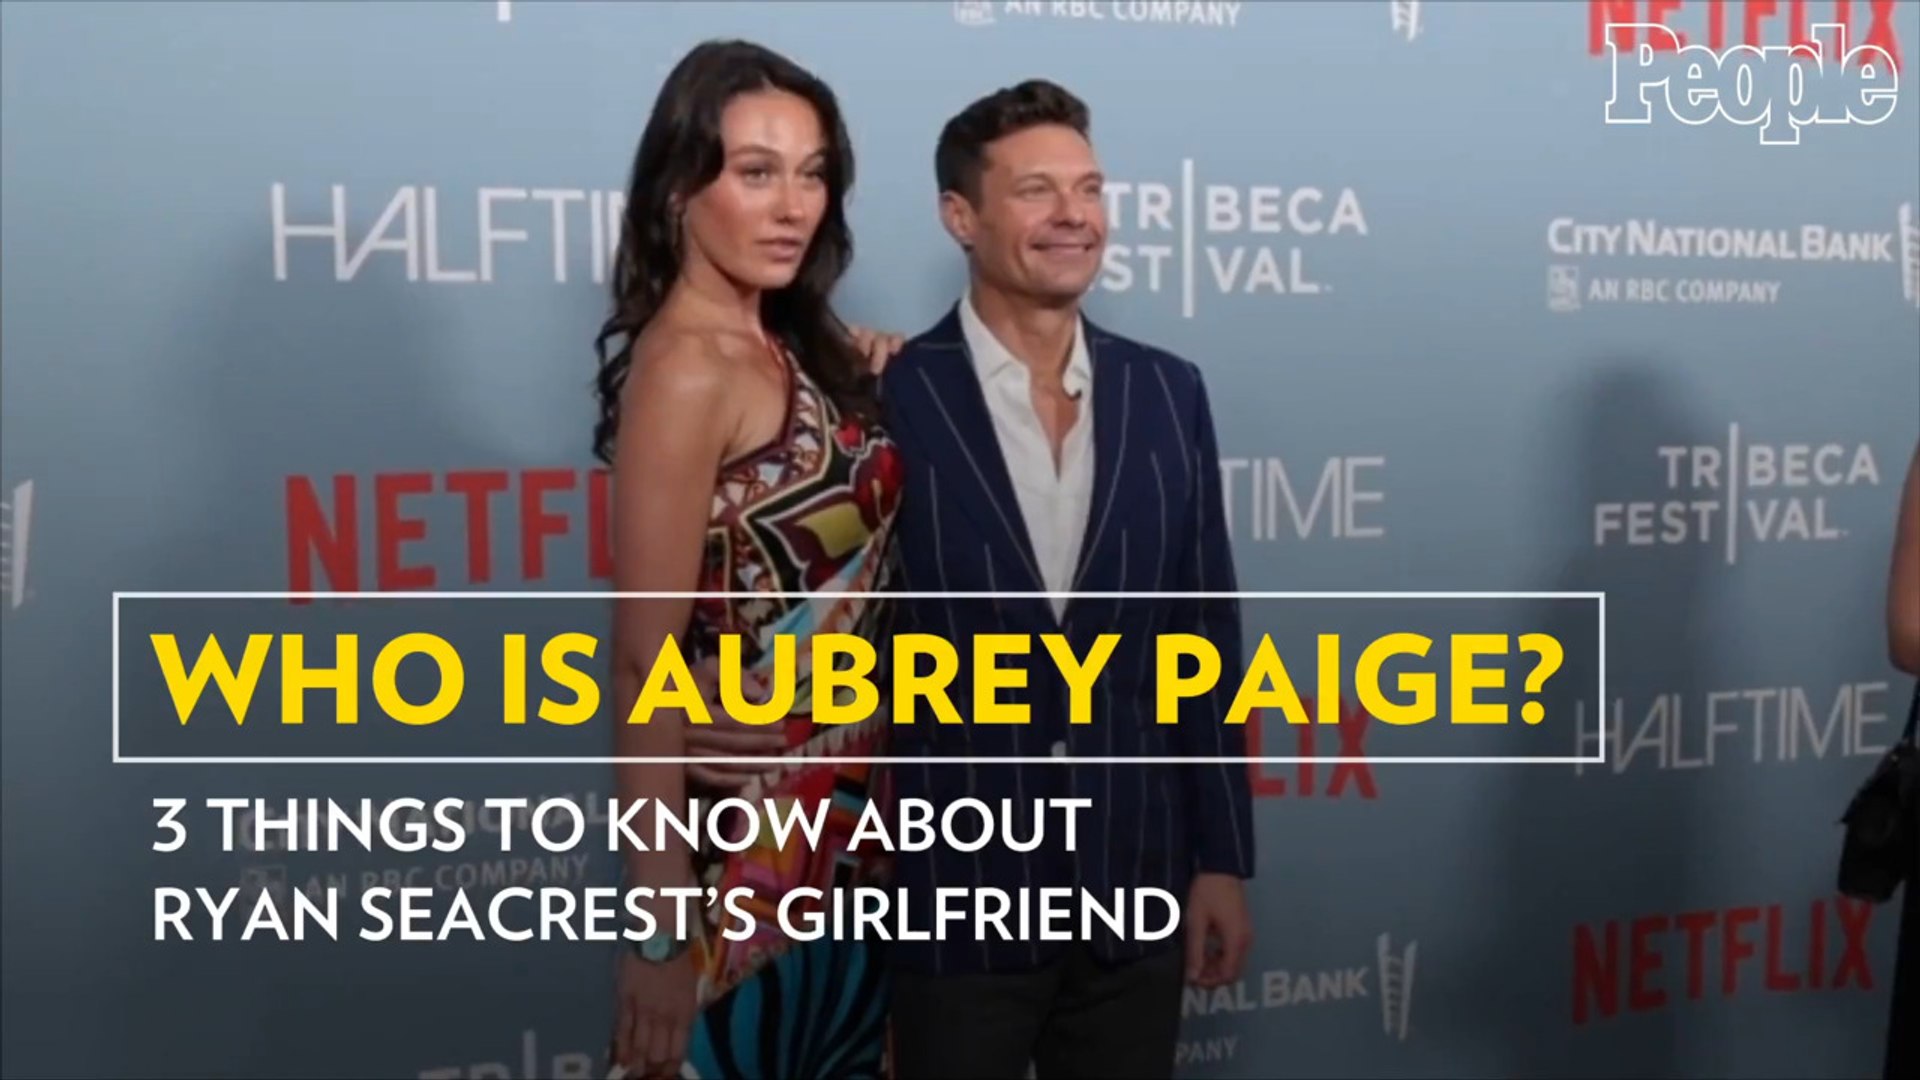 Who Is Aubrey Paige? 3 Things to Know About Ryan Seacrests Girlfriend pic